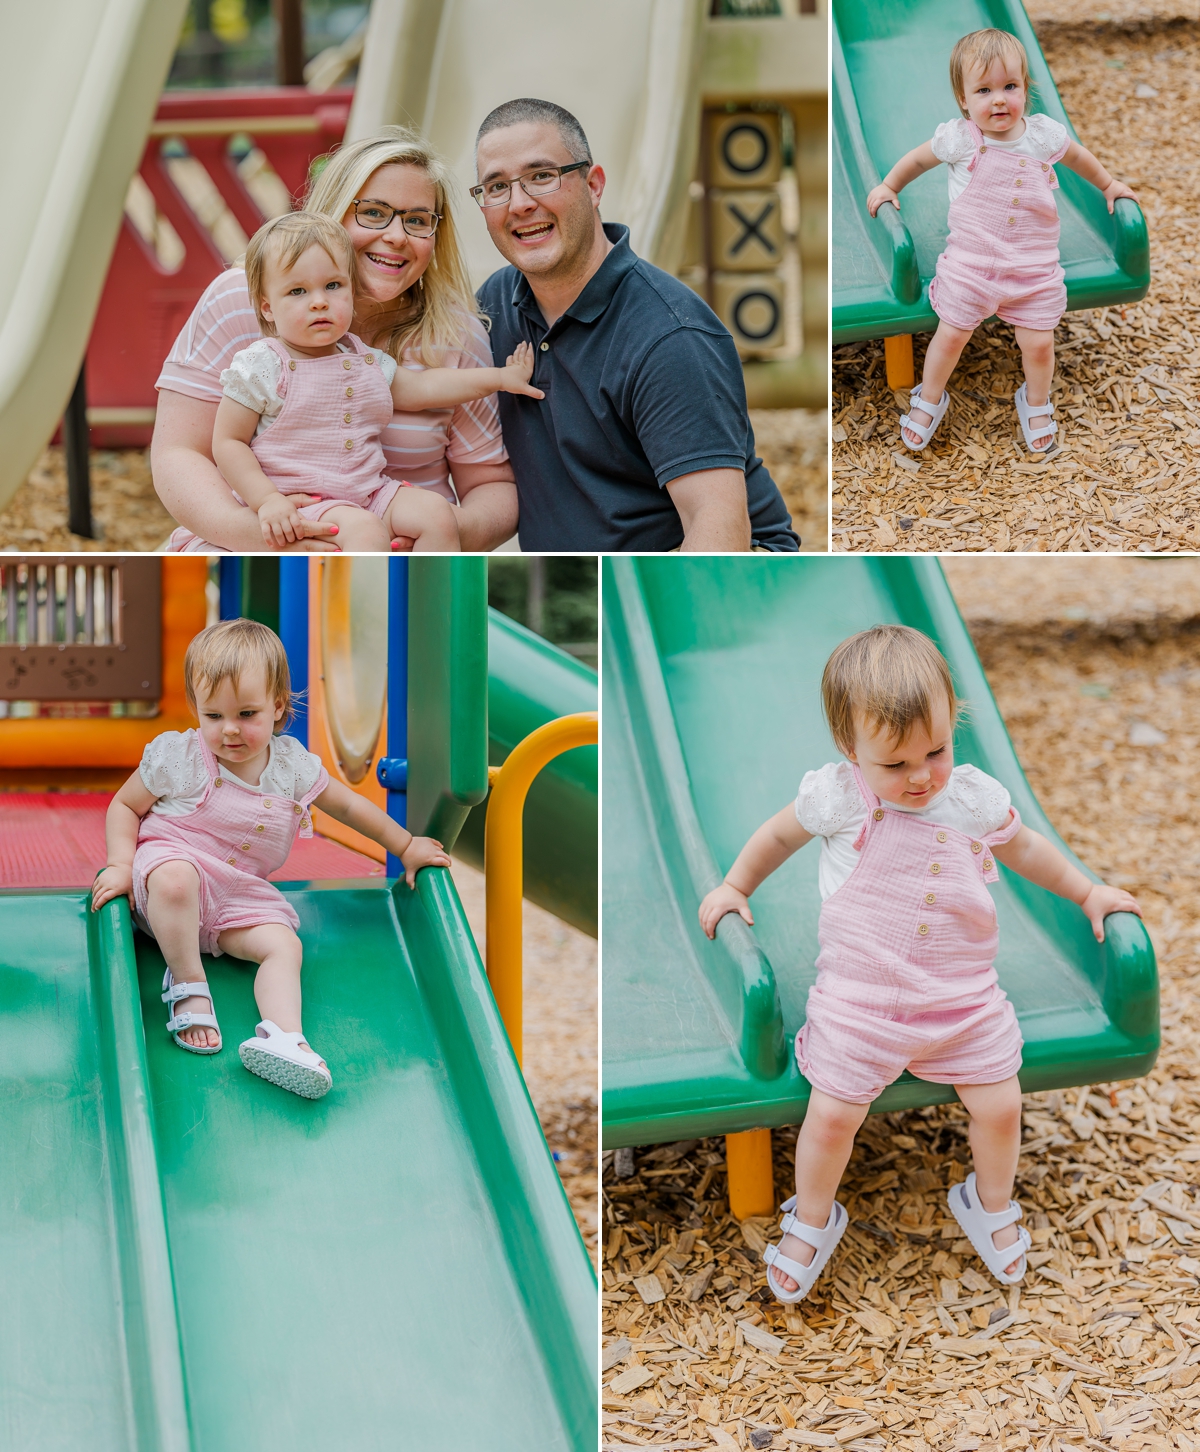 Collage of the Buckless family playing with Abigail on the slide and posing for a picture